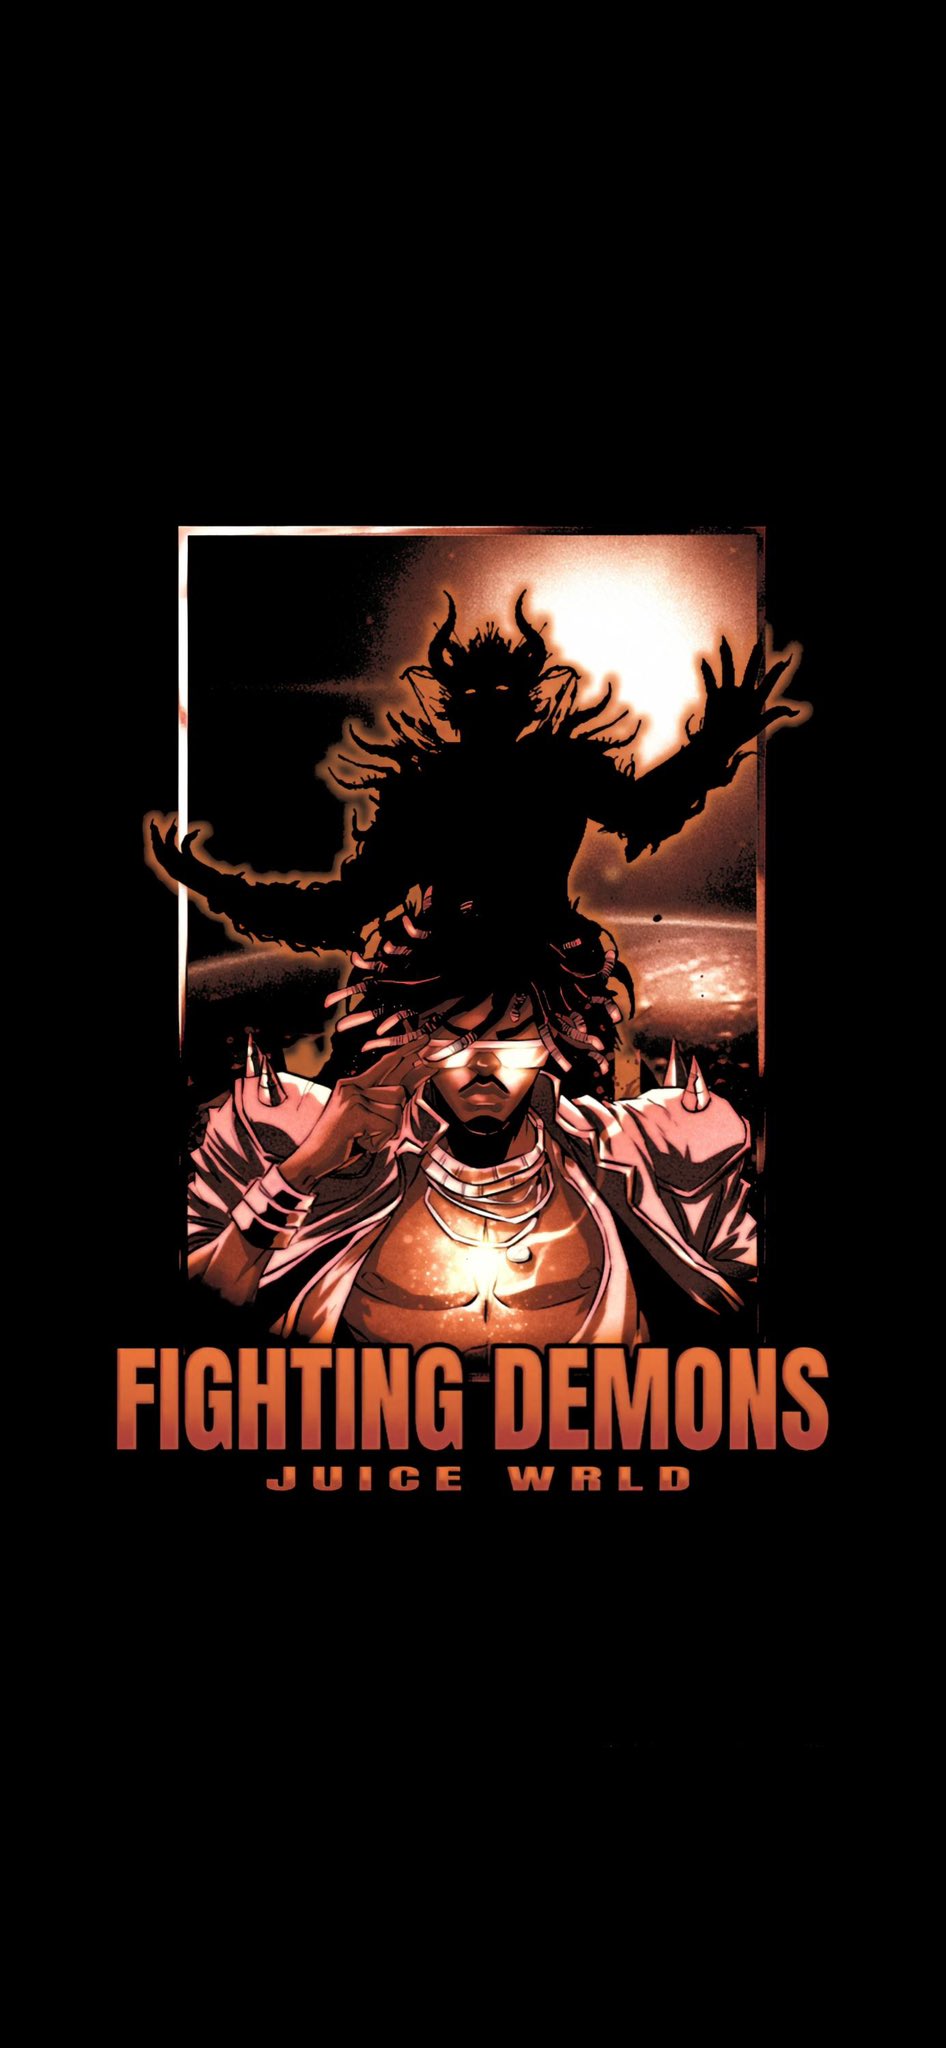 Nathan WRLD Fighting Demons Wallpaper I Made Based Off Of The New Merch Drop! 1 2 If You Like These Edits Please Consider Leaving A Like And Following! #juicewrld #fightingdemons #